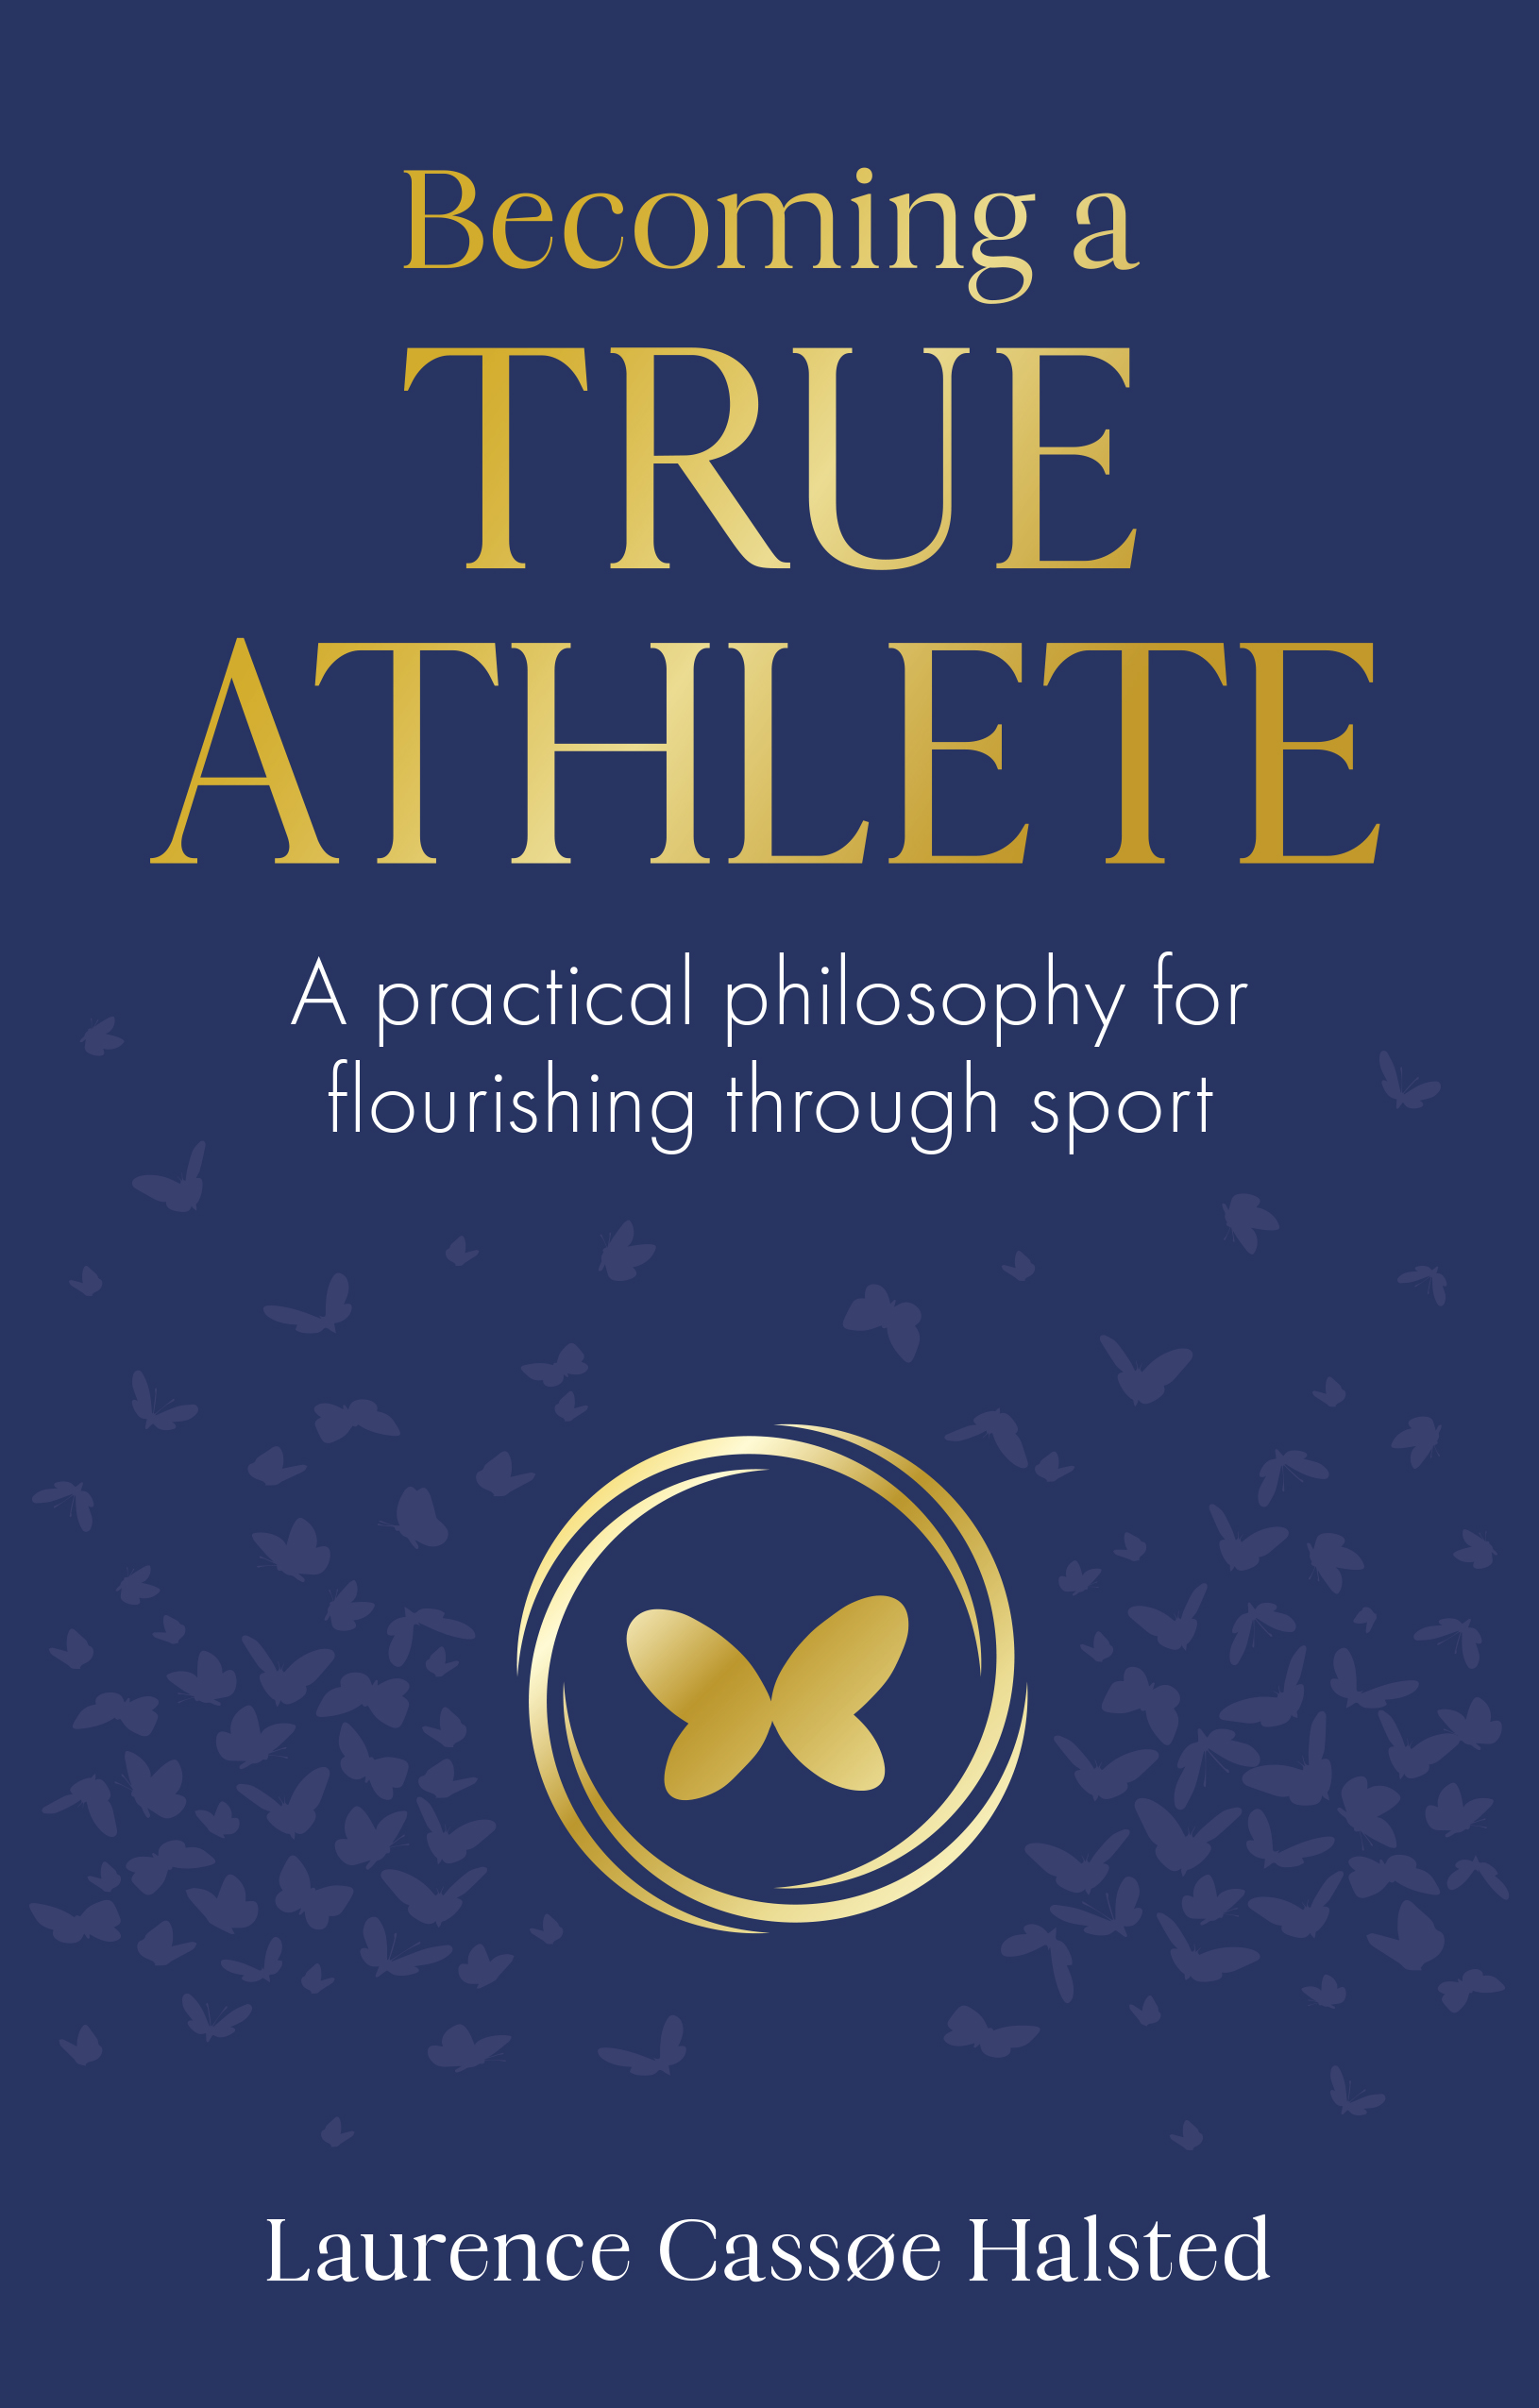 Becoming a True Athlete: A Practical Philosophy for Flourishing Through Sport